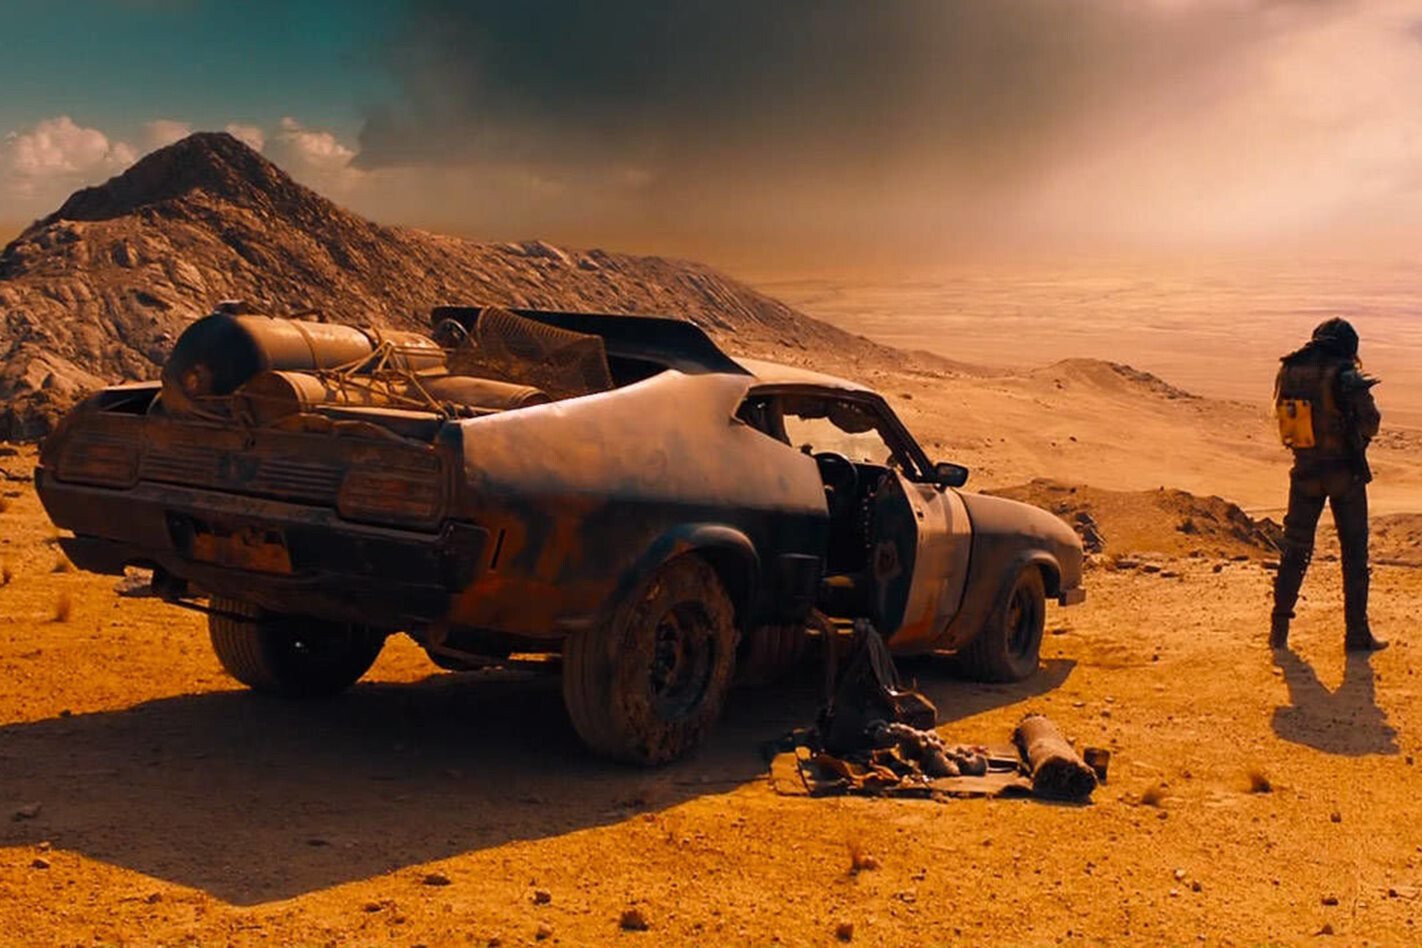 MAD MAX: FURY ROAD EXPOSE OUT TOMORROW